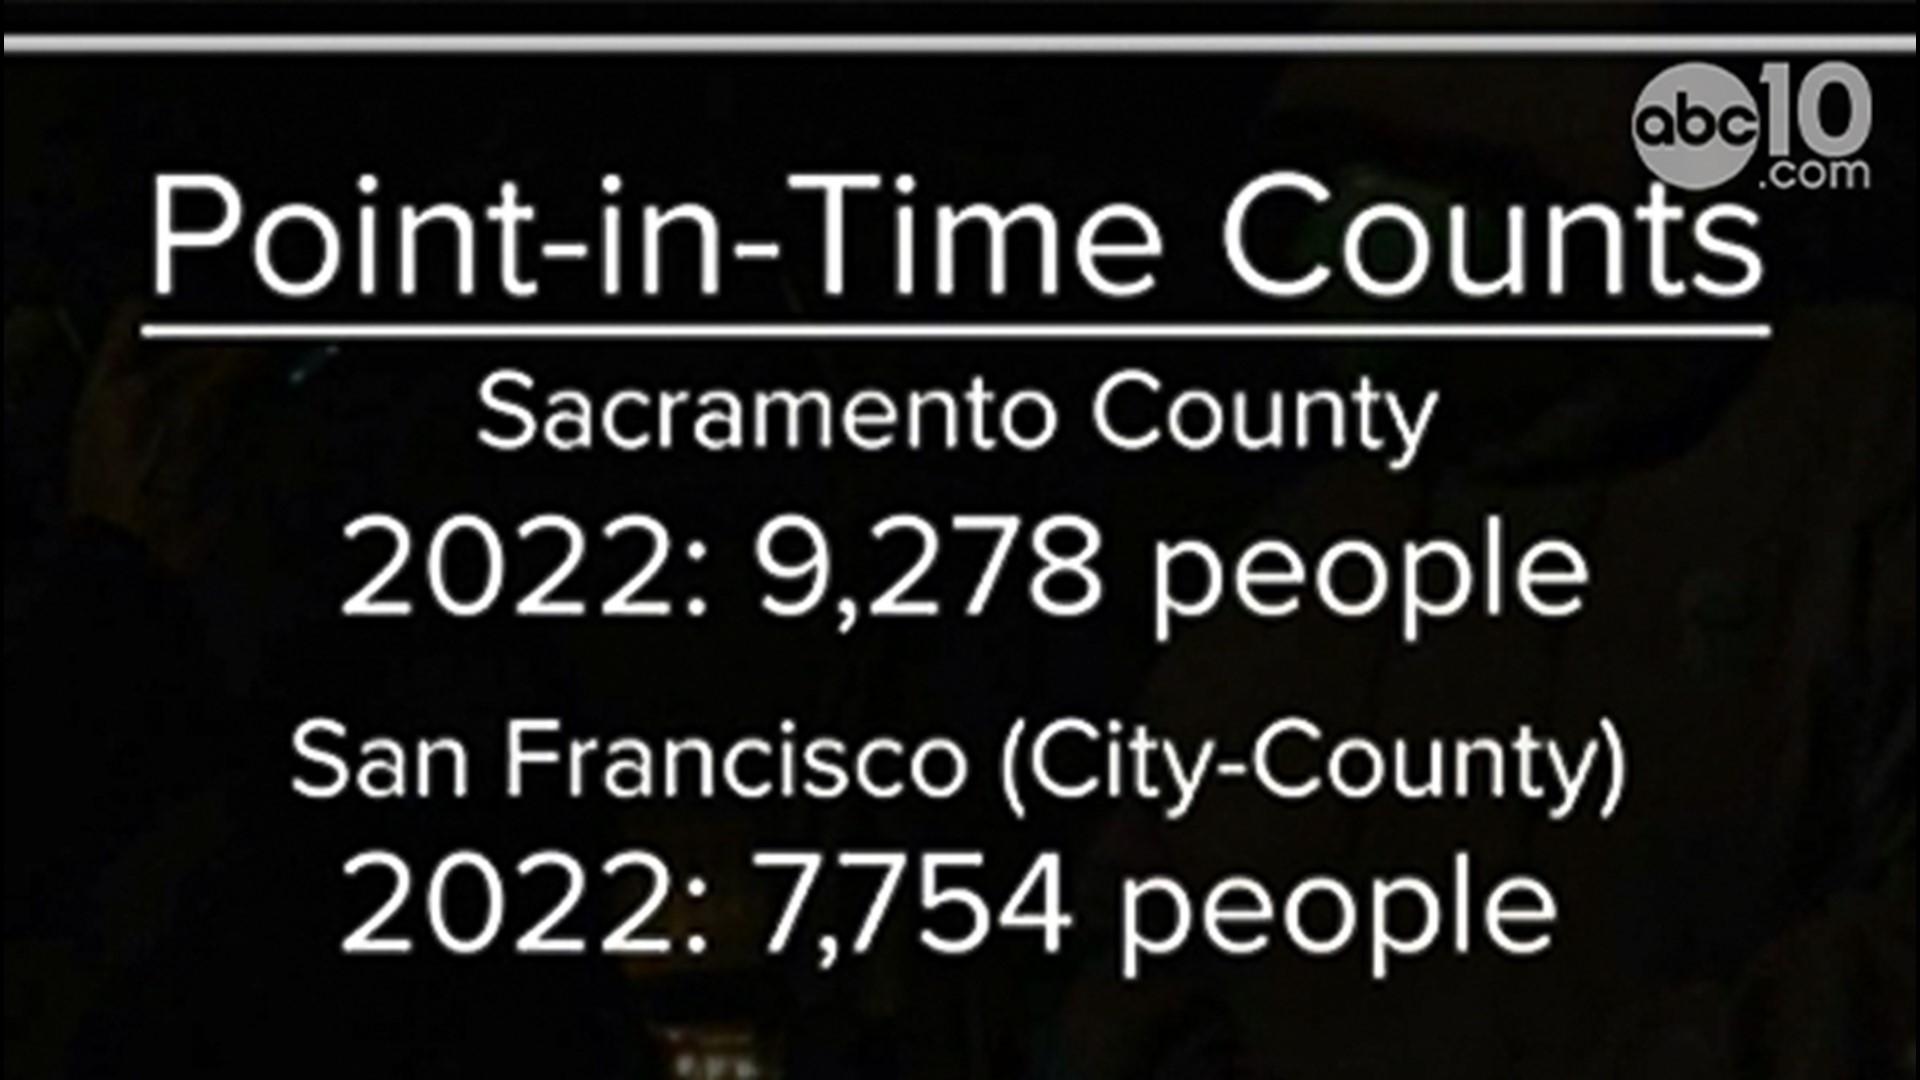 Sacramento County recently released results from its Point in Time (PIT) count of unhoused residents, and it showed the housing crisis continues to spiral.